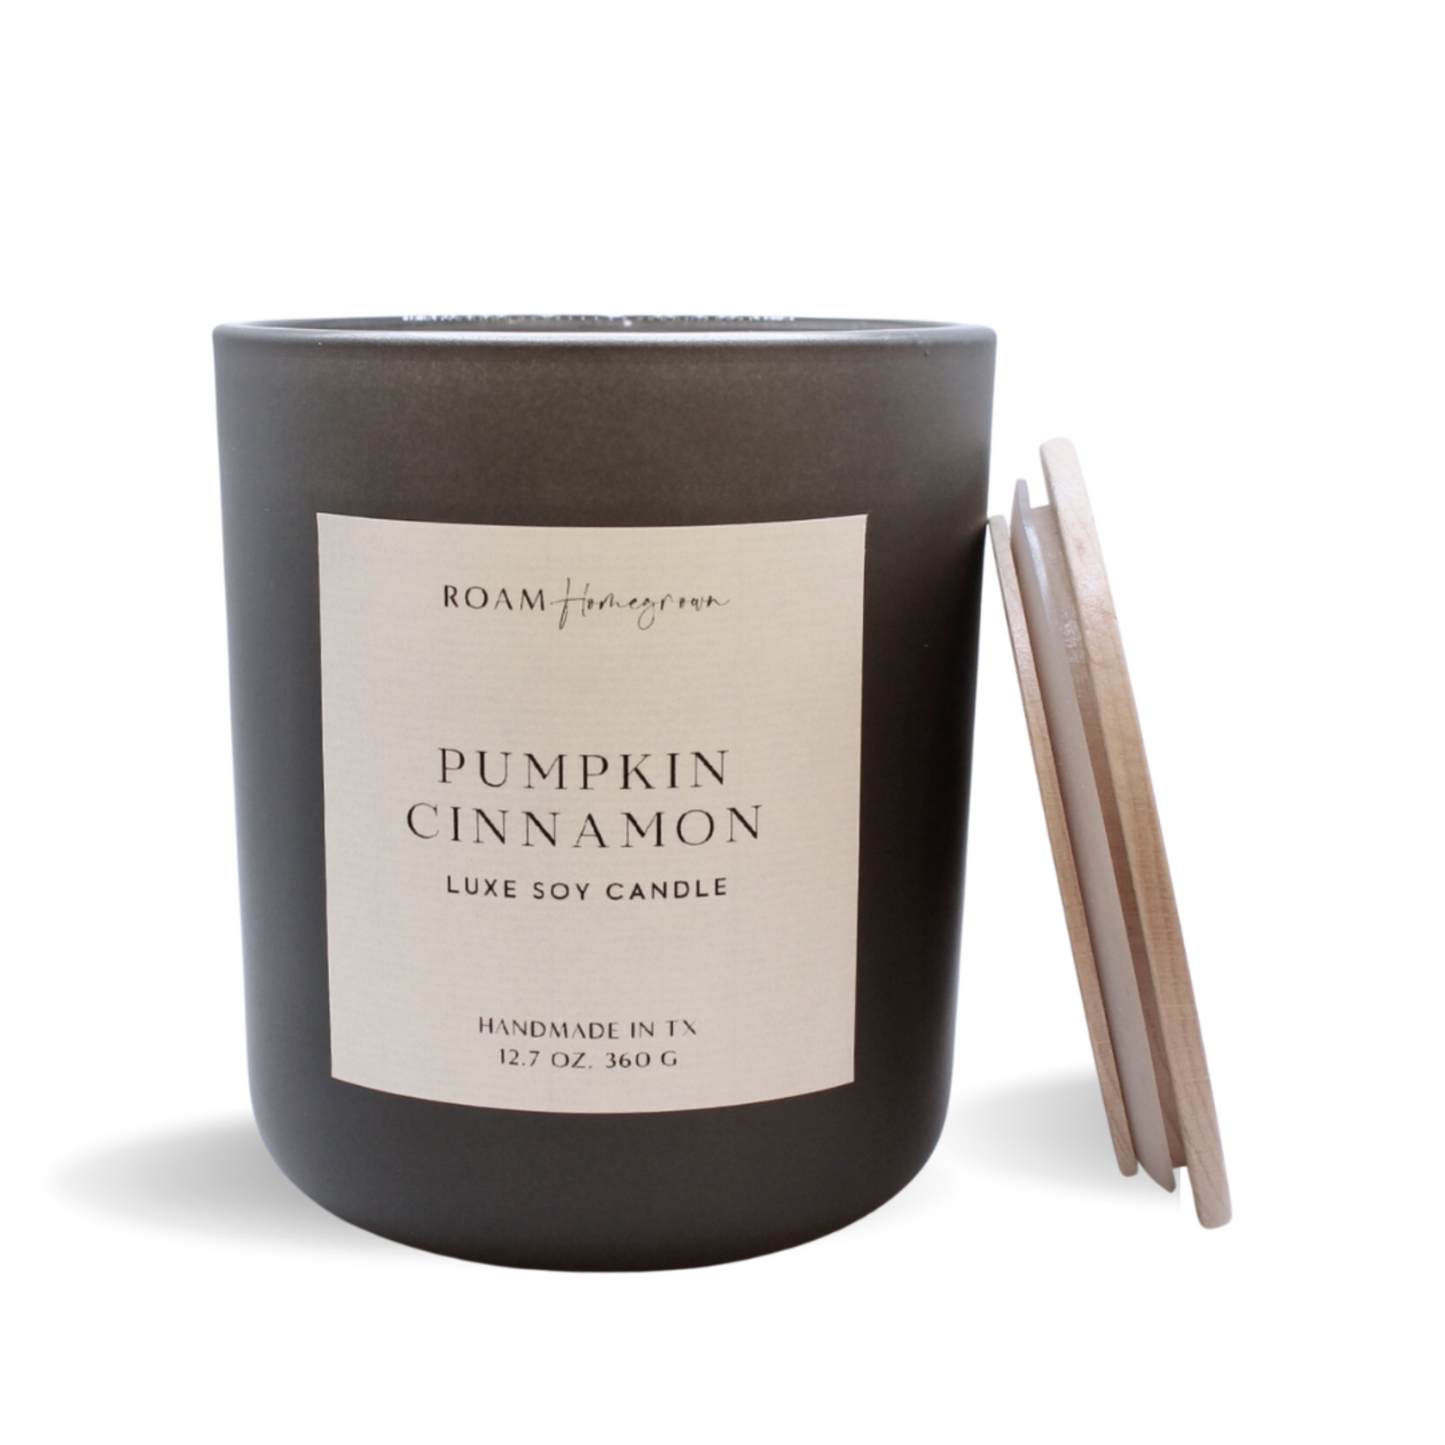 Pumpkin Cinnamon Soy Candle, 12.7 oz, Matte Glass with Wood Lid